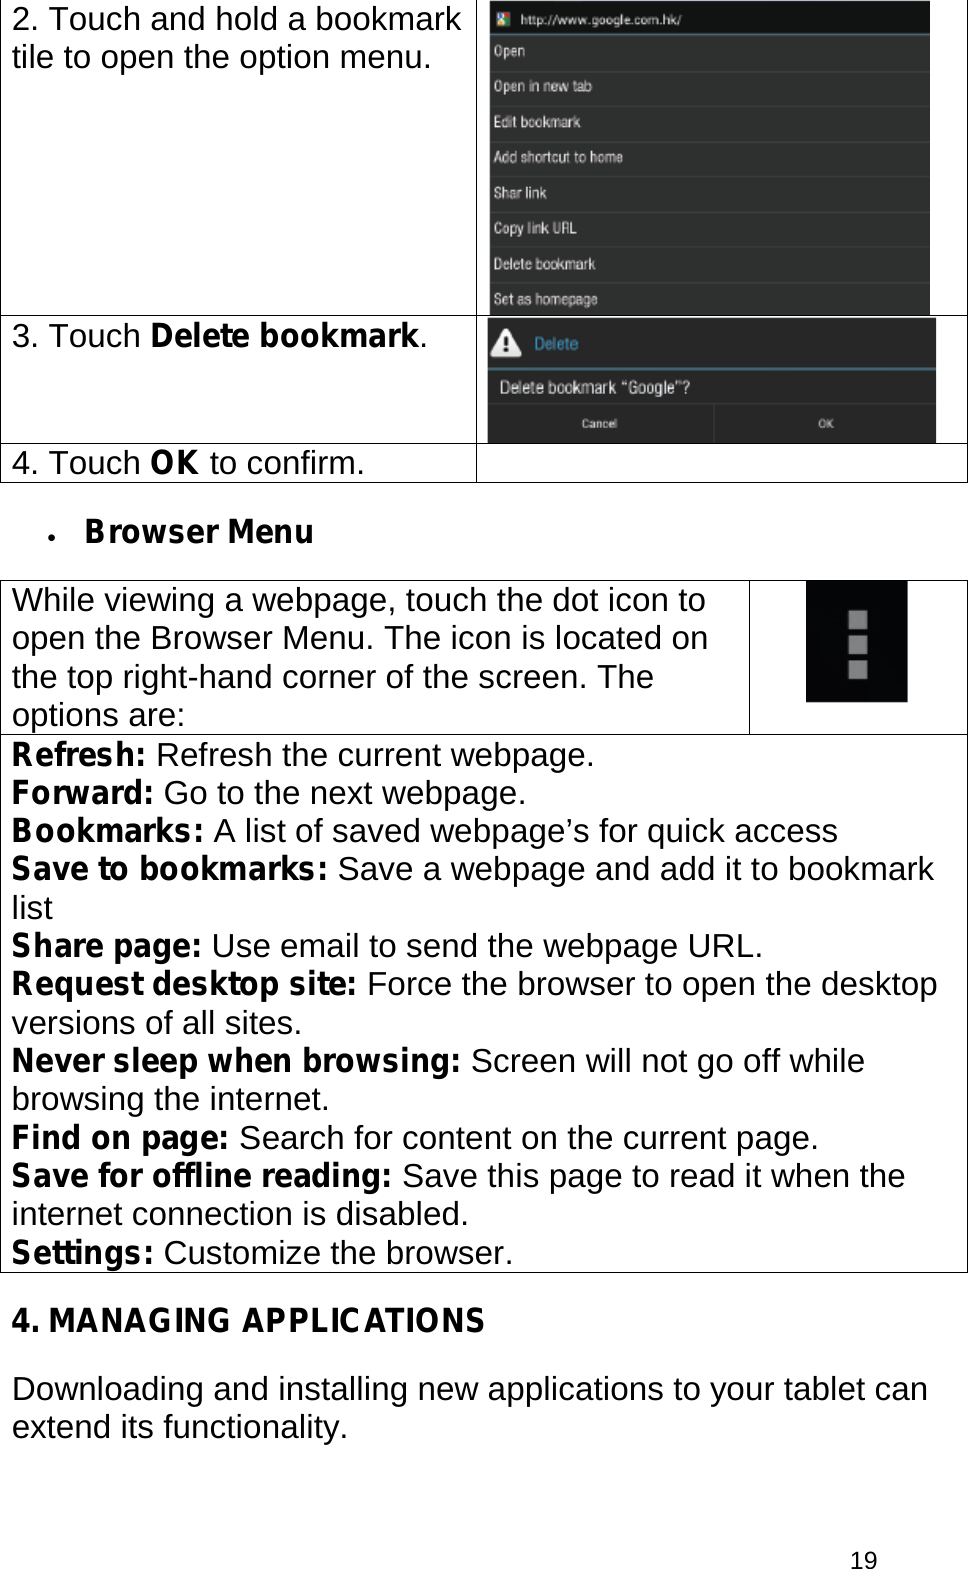  19 2. Touch and hold a bookmark tile to open the option menu.   3. Touch Delete bookmark.  4. Touch OK to confirm.  • Browser Menu While viewing a webpage, touch the dot icon to open the Browser Menu. The icon is located on the top right-hand corner of the screen. The options are:  Refresh: Refresh the current webpage. Forward: Go to the next webpage. Bookmarks: A list of saved webpage’s for quick access Save to bookmarks: Save a webpage and add it to bookmark list Share page: Use email to send the webpage URL. Request desktop site: Force the browser to open the desktop versions of all sites. Never sleep when browsing: Screen will not go off while browsing the internet. Find on page: Search for content on the current page. Save for offline reading: Save this page to read it when the internet connection is disabled. Settings: Customize the browser. 4. MANAGING APPLICATIONS Downloading and installing new applications to your tablet can extend its functionality. 